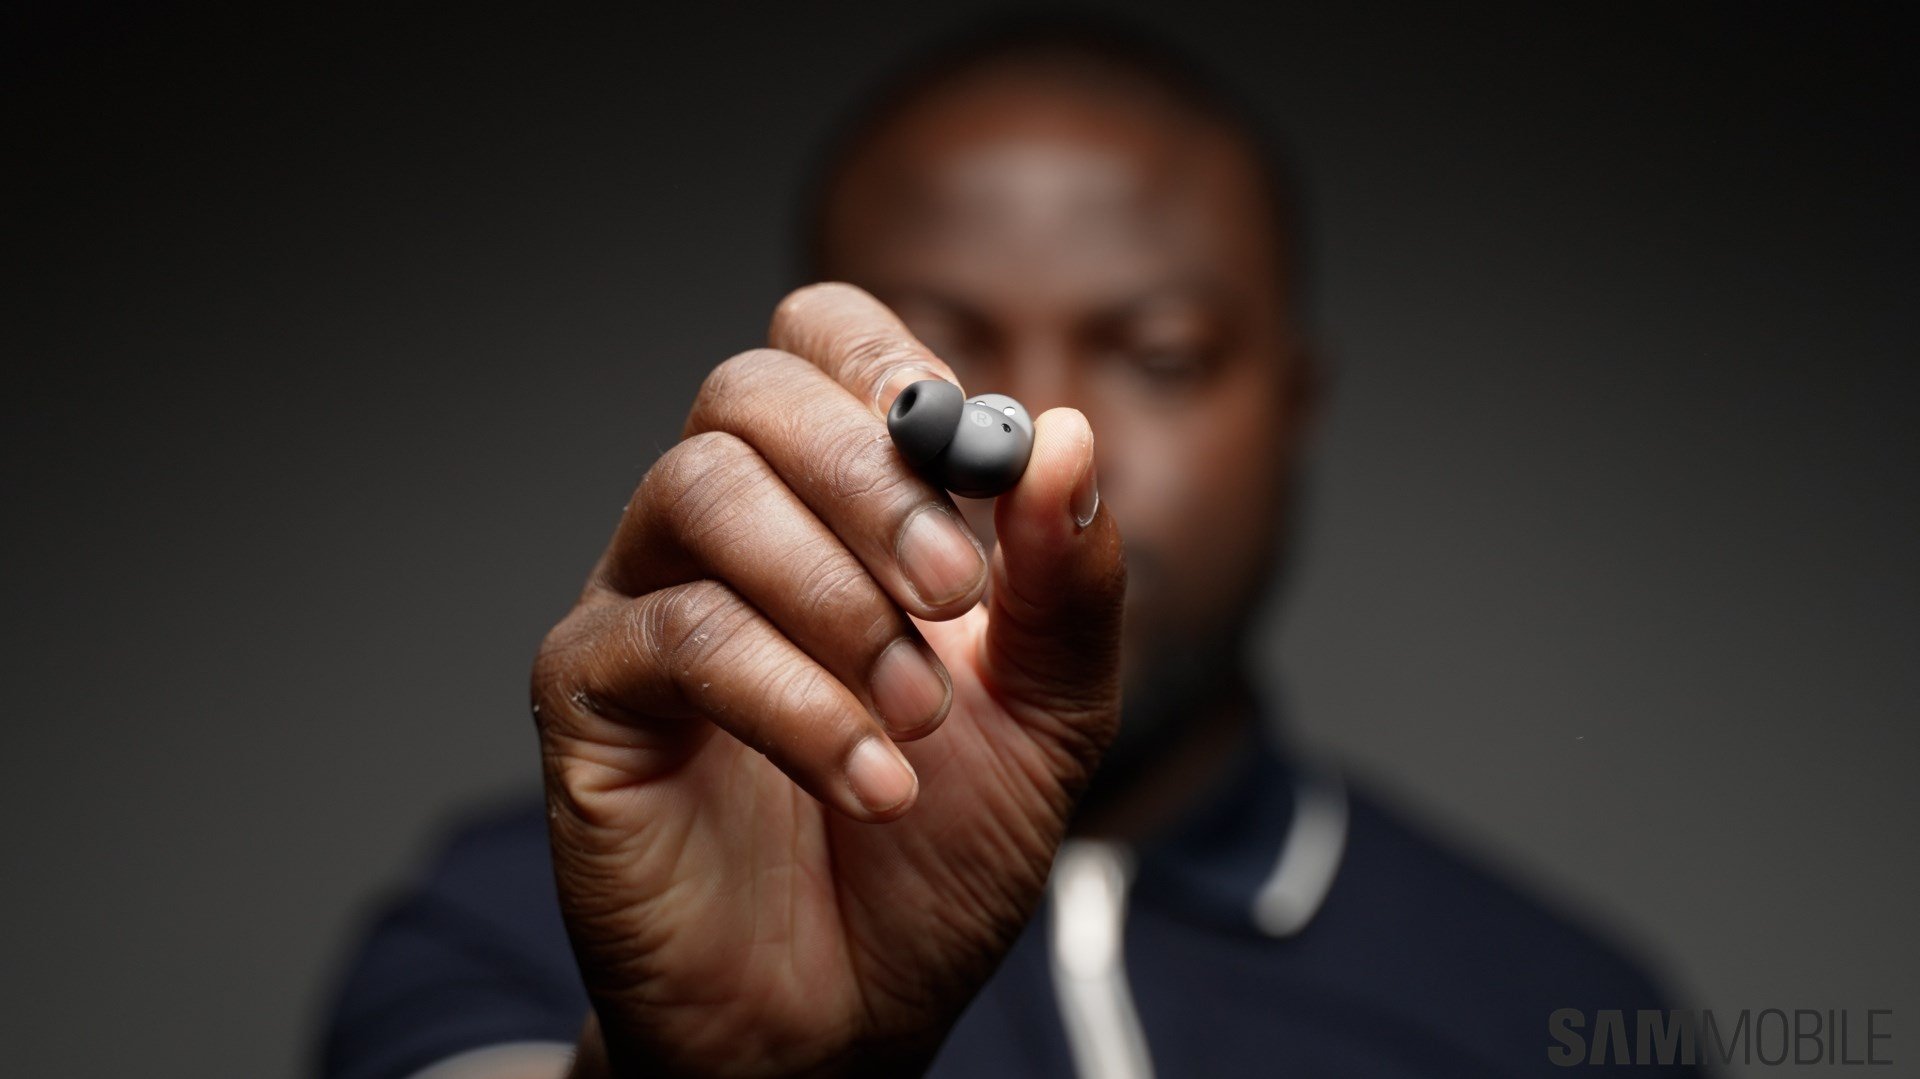 Galaxy Buds 2 Pro earbuds get their first official firmware update - SamMobile 